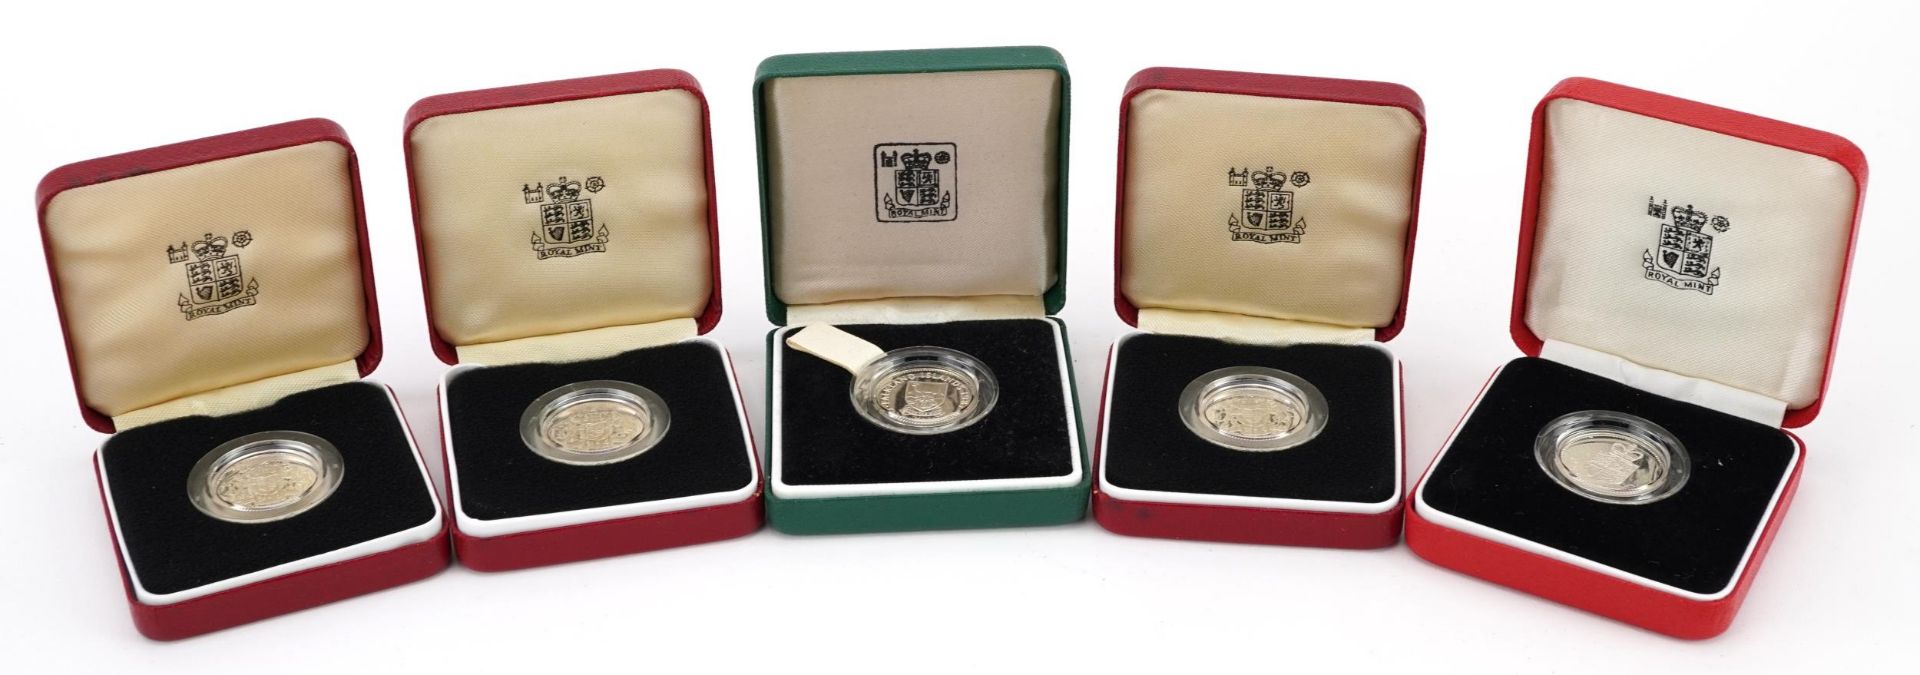 Five United Kingdom silver proof one pound coins by The Royal Mint and a Falkland Islands silver